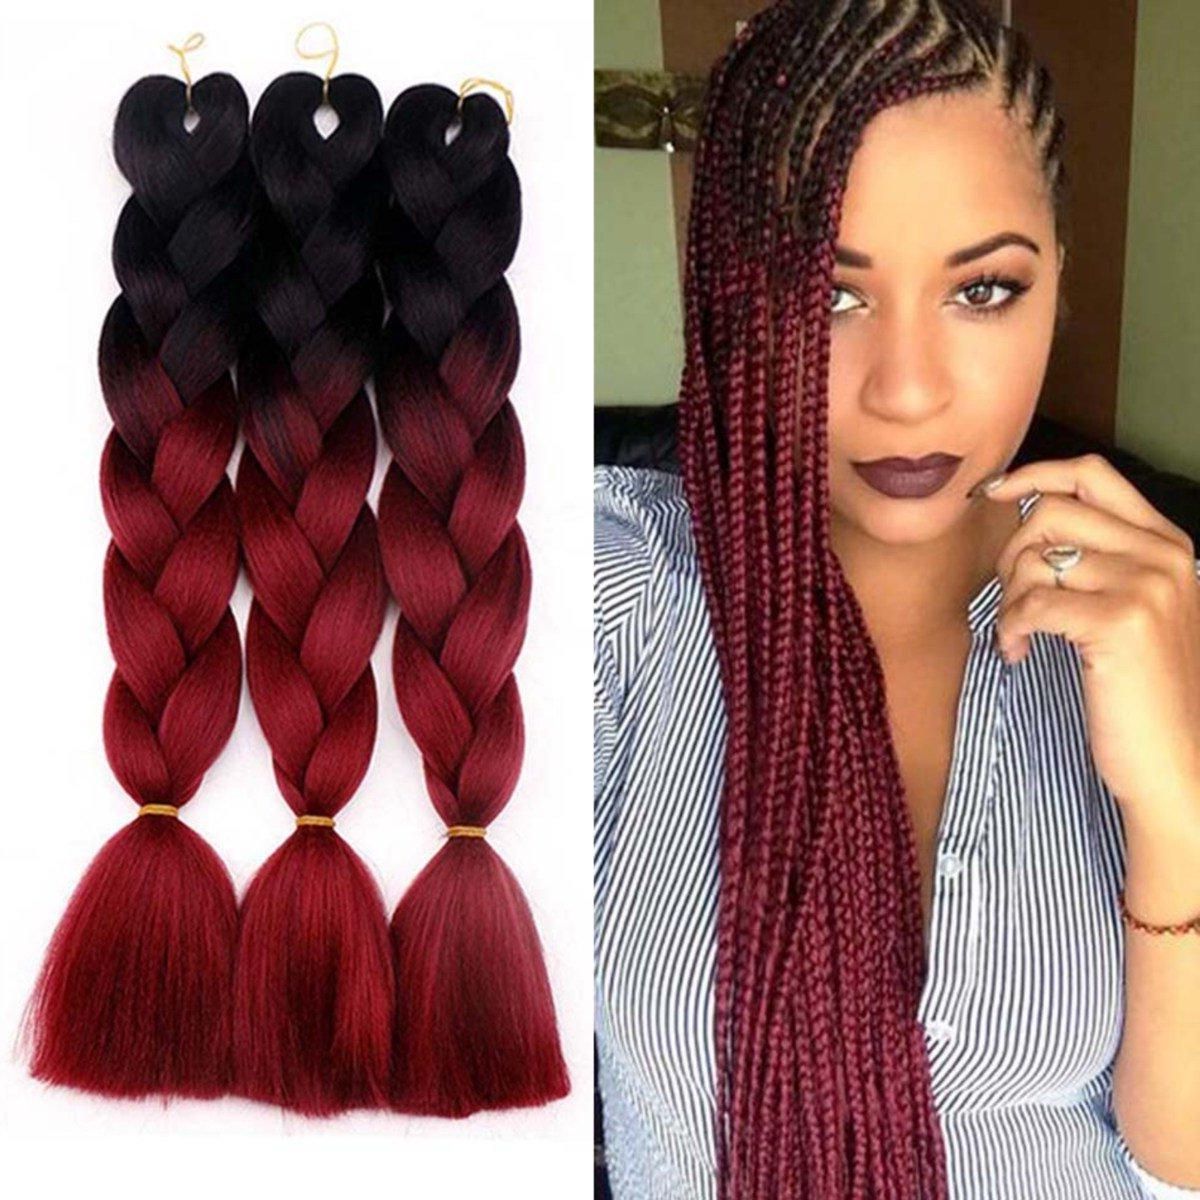 2020 Two Ombre Under Braid Hairstyles Regarding Hot! 1pcs 24inches 2 Tone Jumbo Braid Ombre Braiding Hair X Pression Hair  Extensions Afro Box Braids Crochet Hair Synthetic Fiber Braids (View 4 of 20)